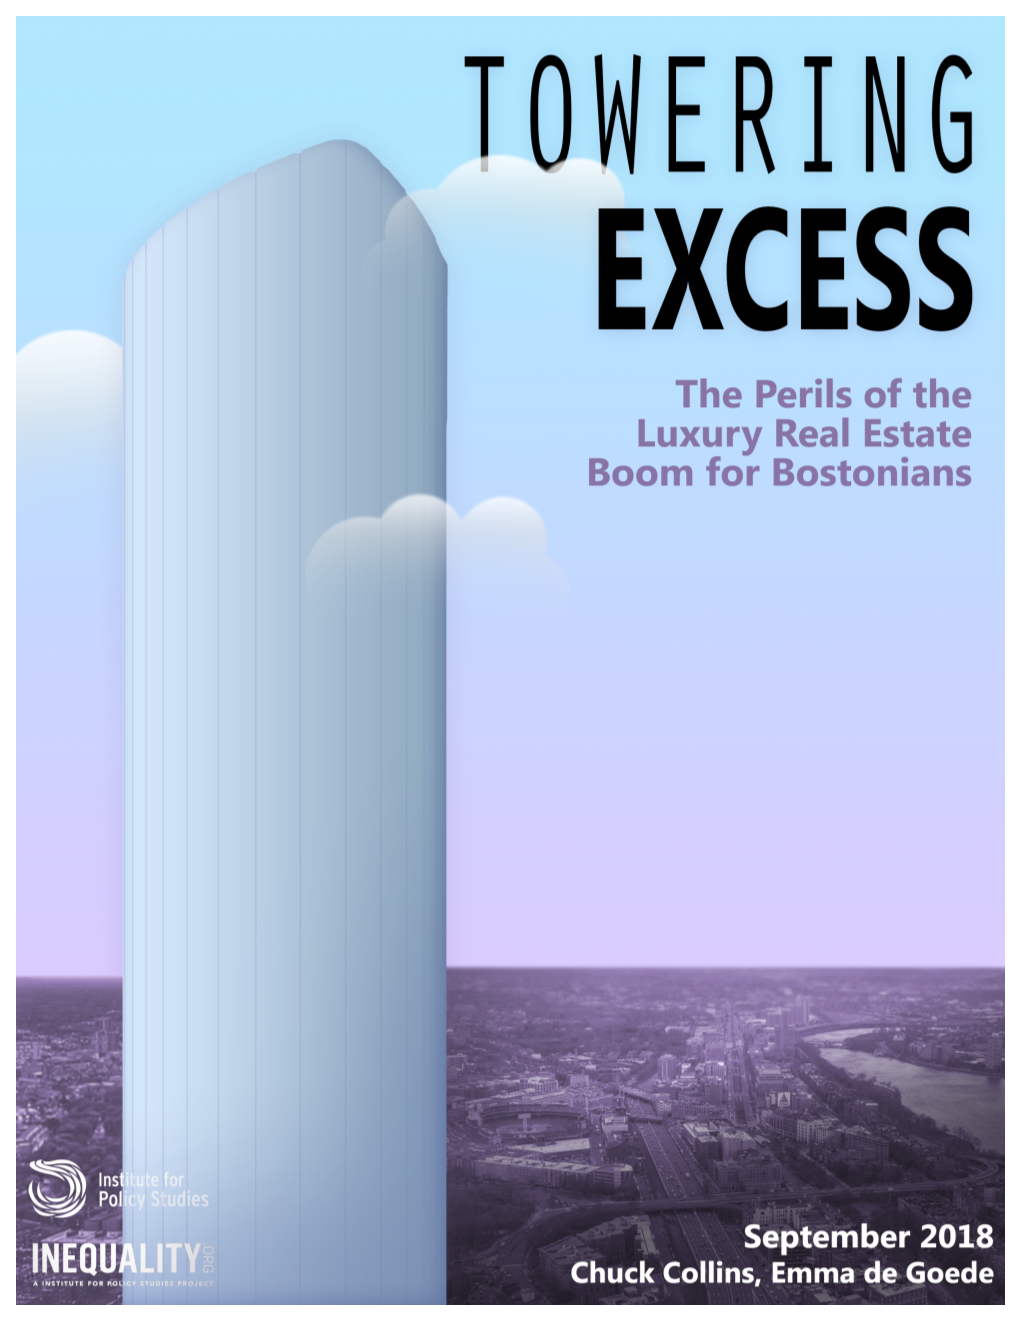 Towering Excess the Perils of Boston's Luxury